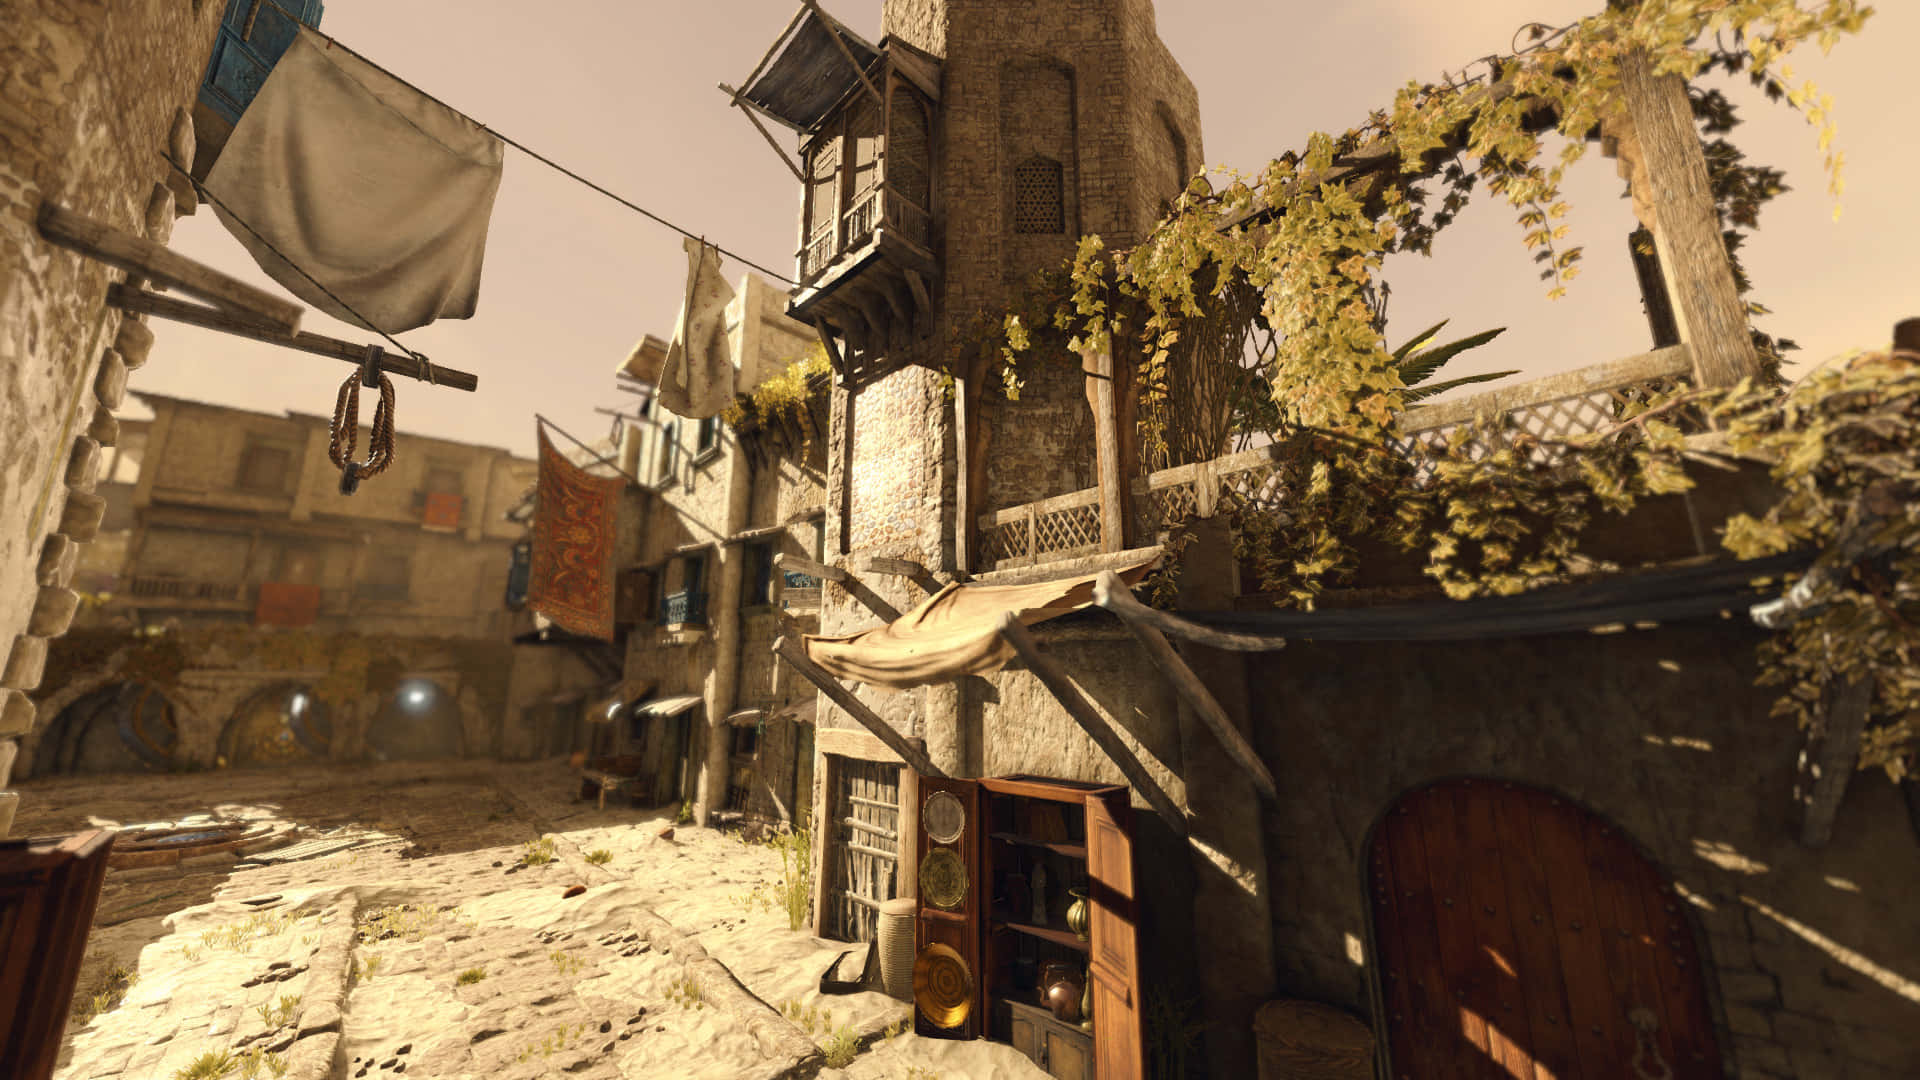 A Screenshot Of An Old Alley With Clothes Hanging On The Clothesline